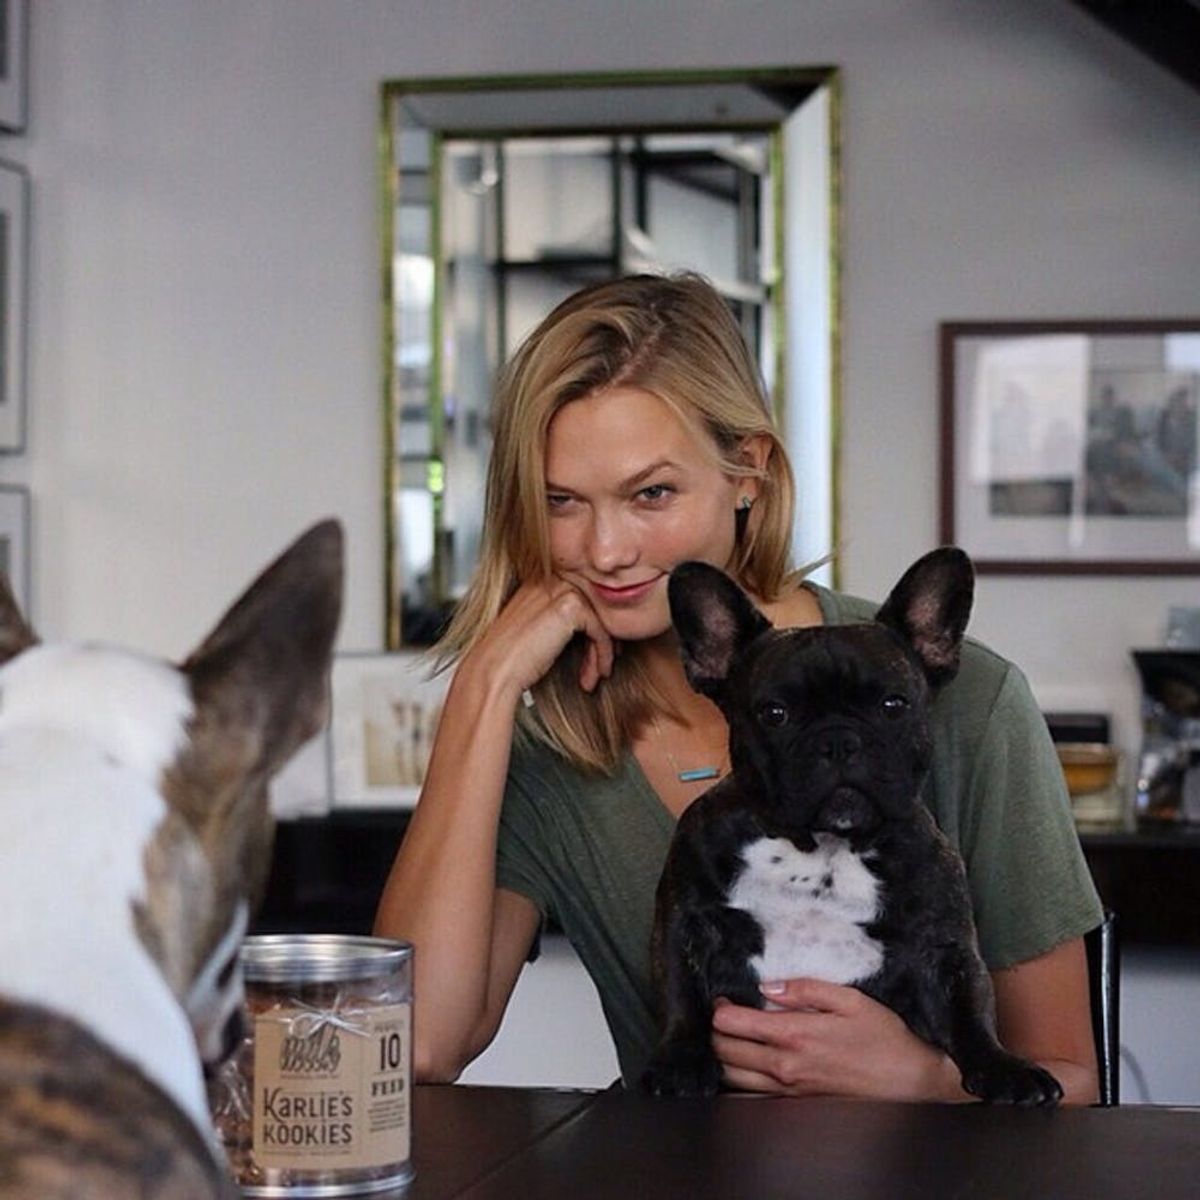 Why Supermodel Karlie Kloss Eats Cookies Before the Gym